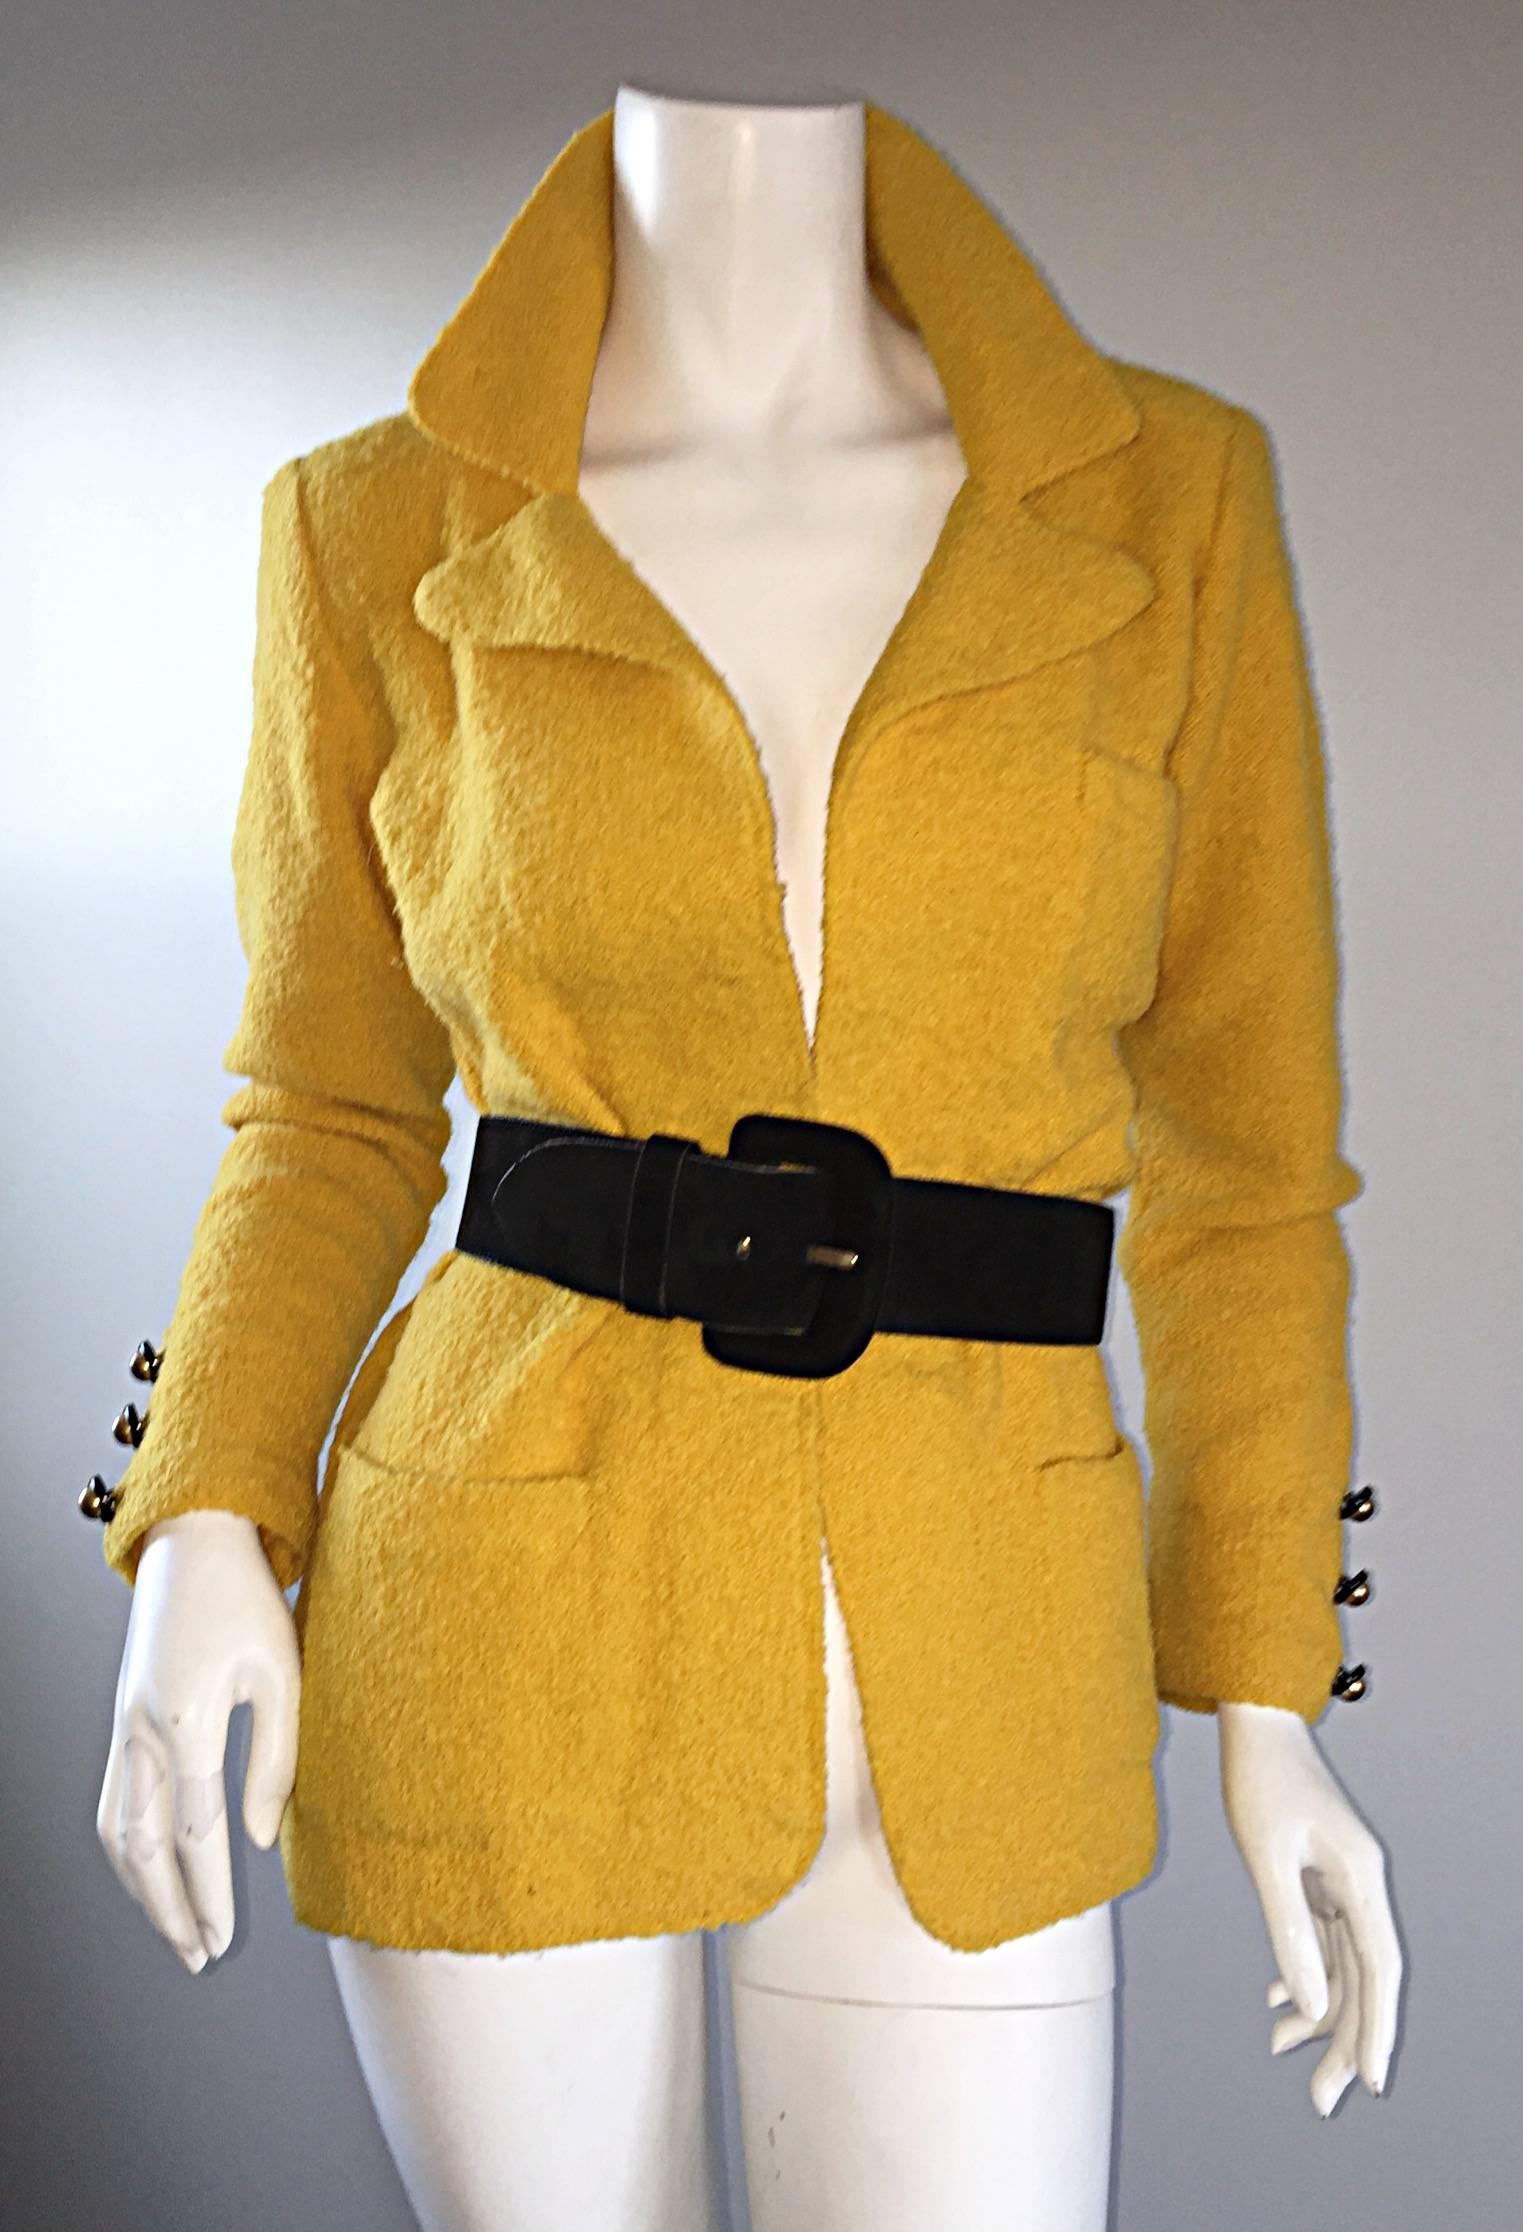 Excellent vintage Adolfo mustard yellow knit blazer jacket! Open front style, with three statement buttons at each cuff. Curved lapels, that add just the right amount of femininity. Features two pockets at both sides of waist, and one at left